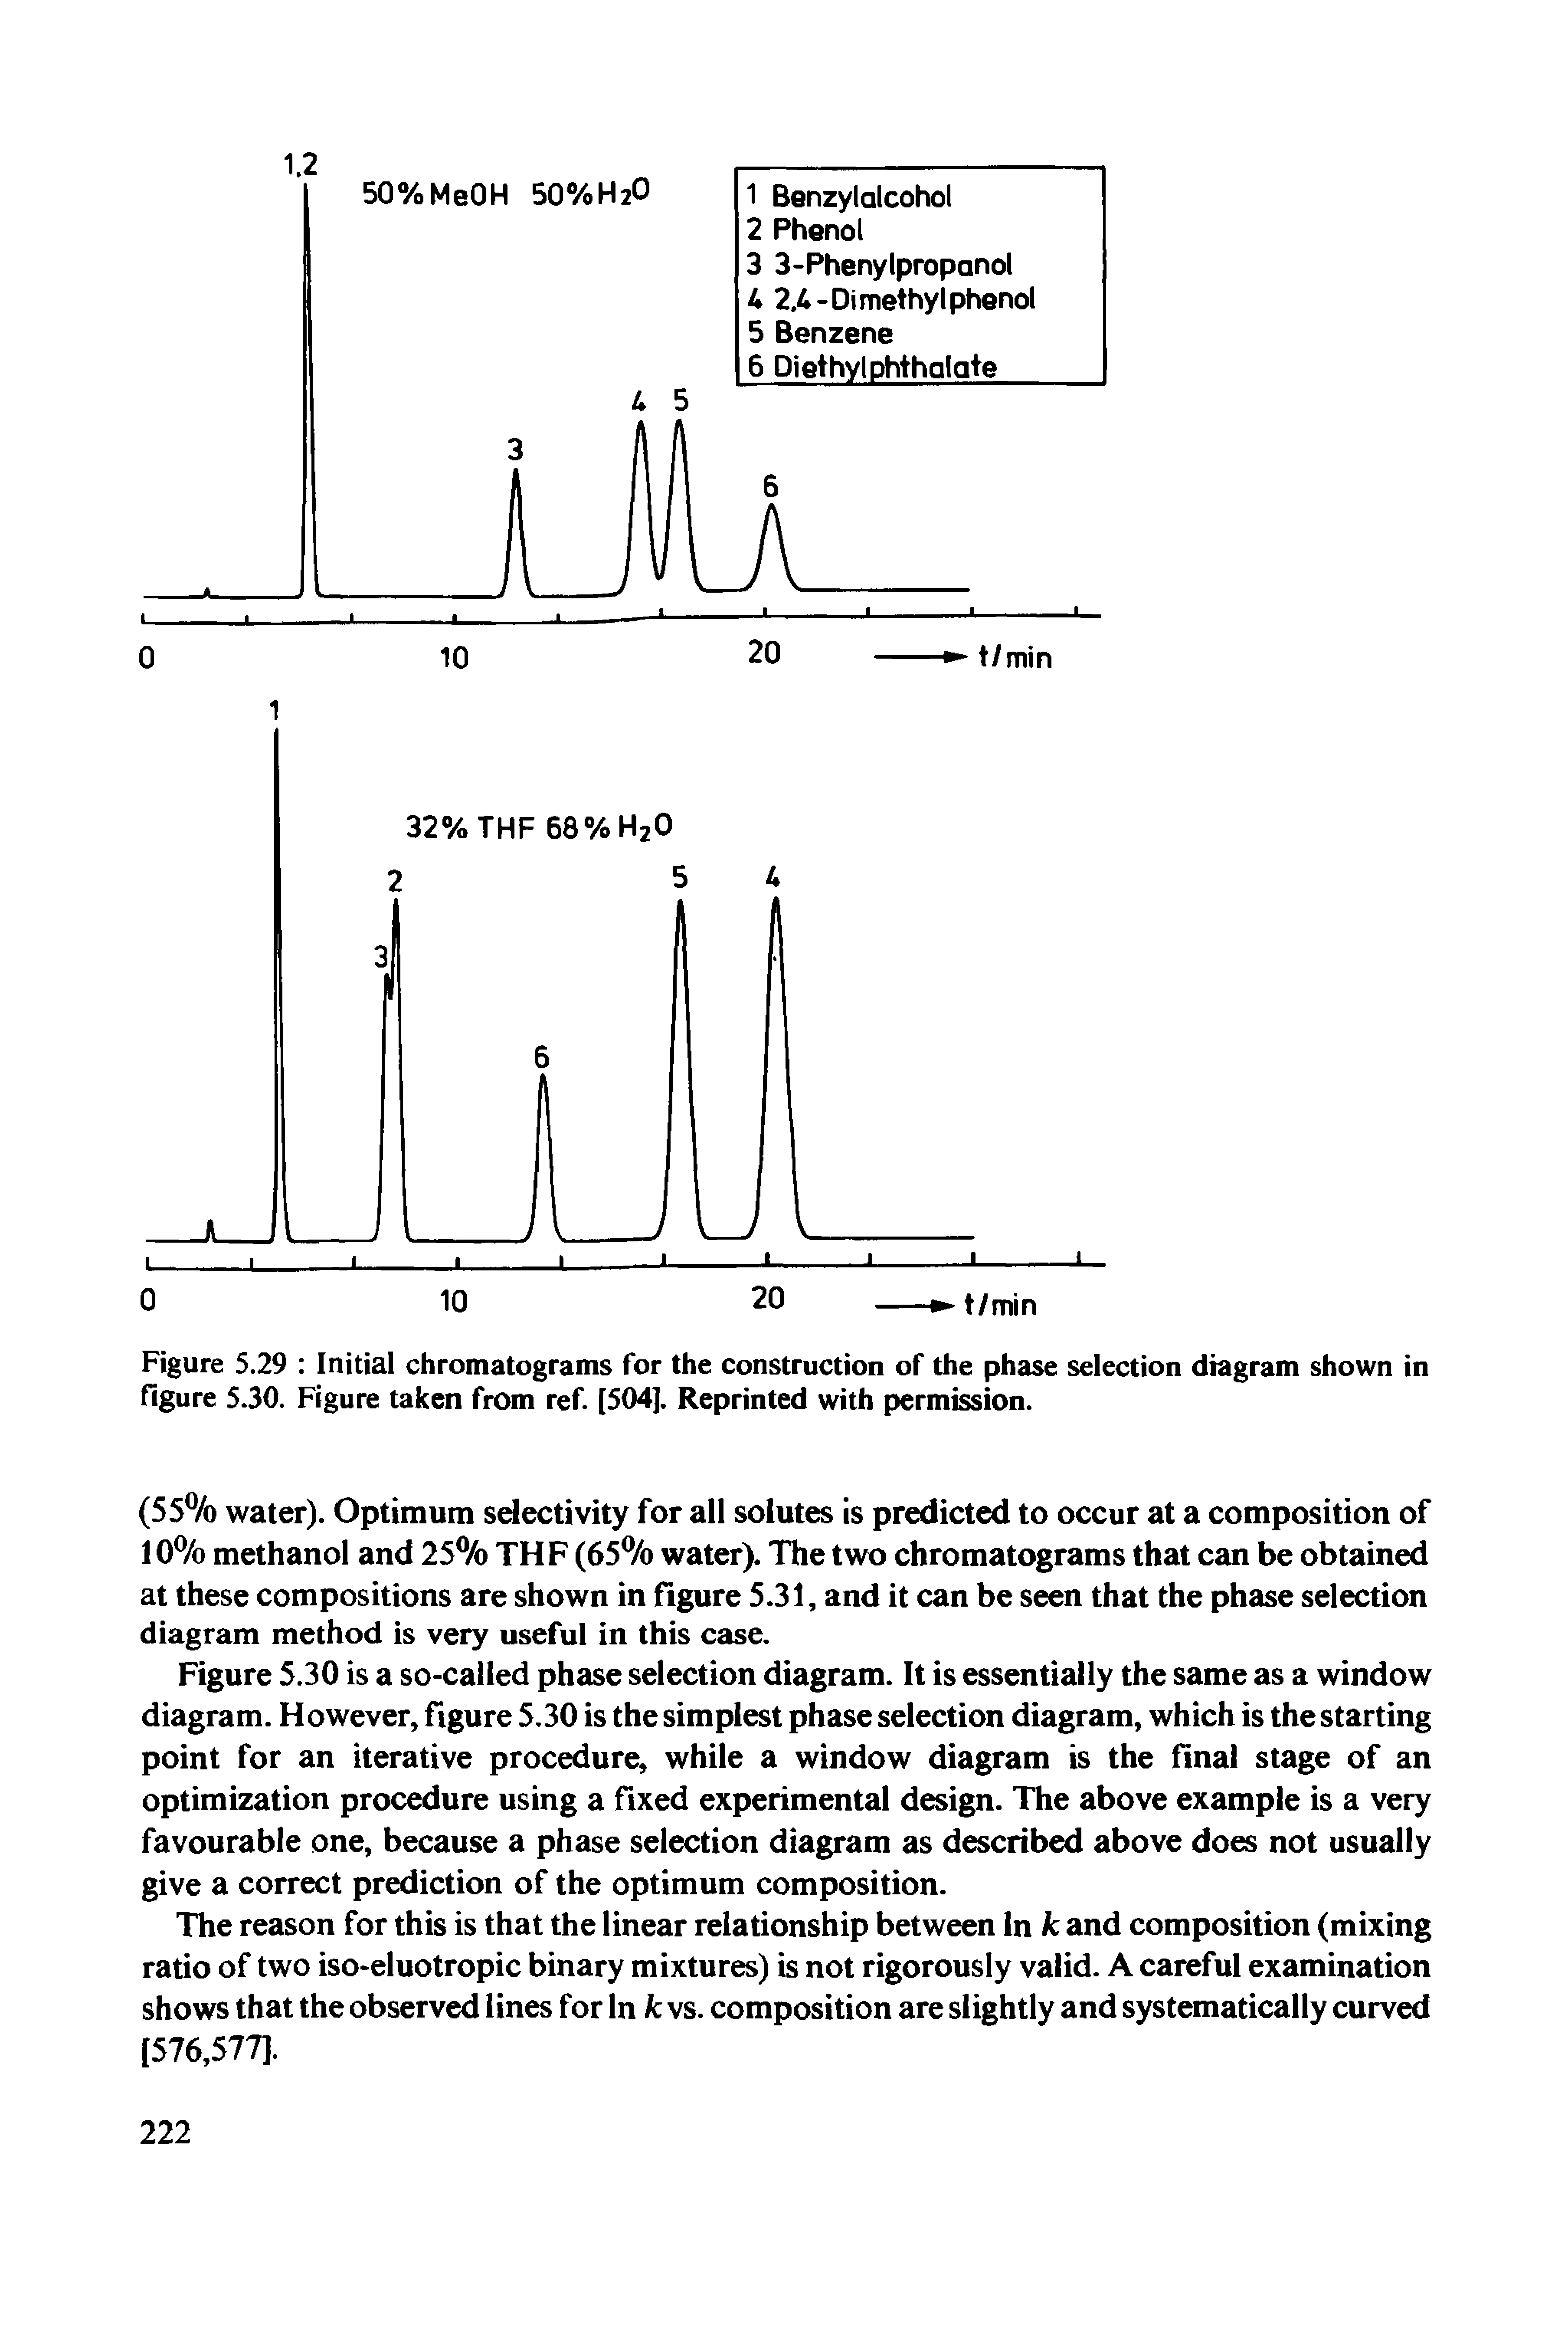 Figure 5.29 Initial chromatograms for the construction of the phase selection diagram shown in Figure 5.30. Figure taken from ref. [504], Reprinted with permission.